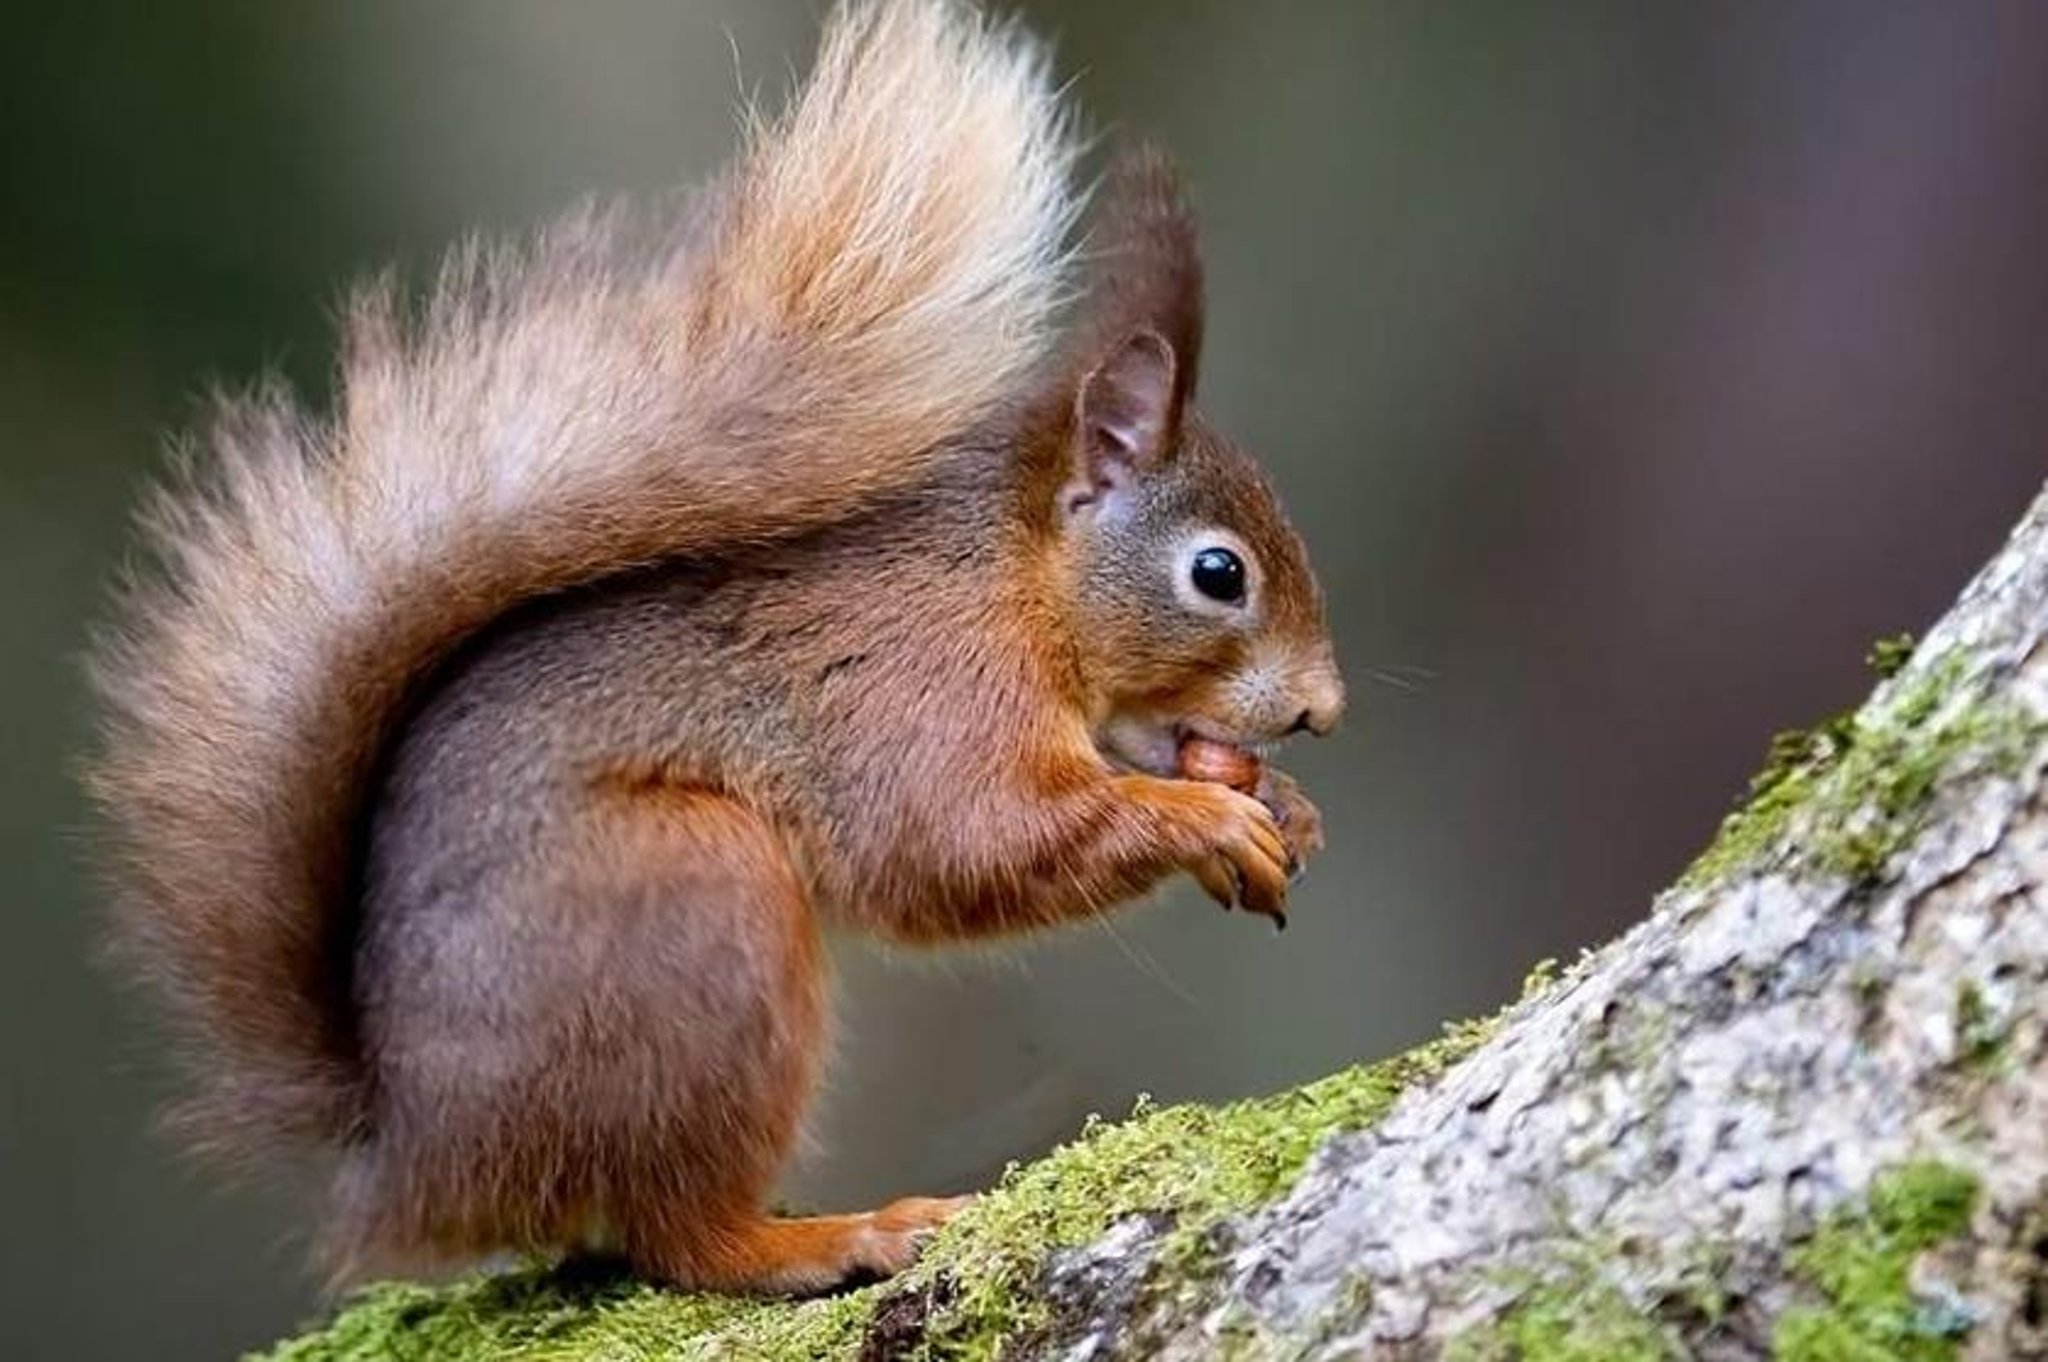 NI public asked to play a role in seeing red ... squirrels and kites